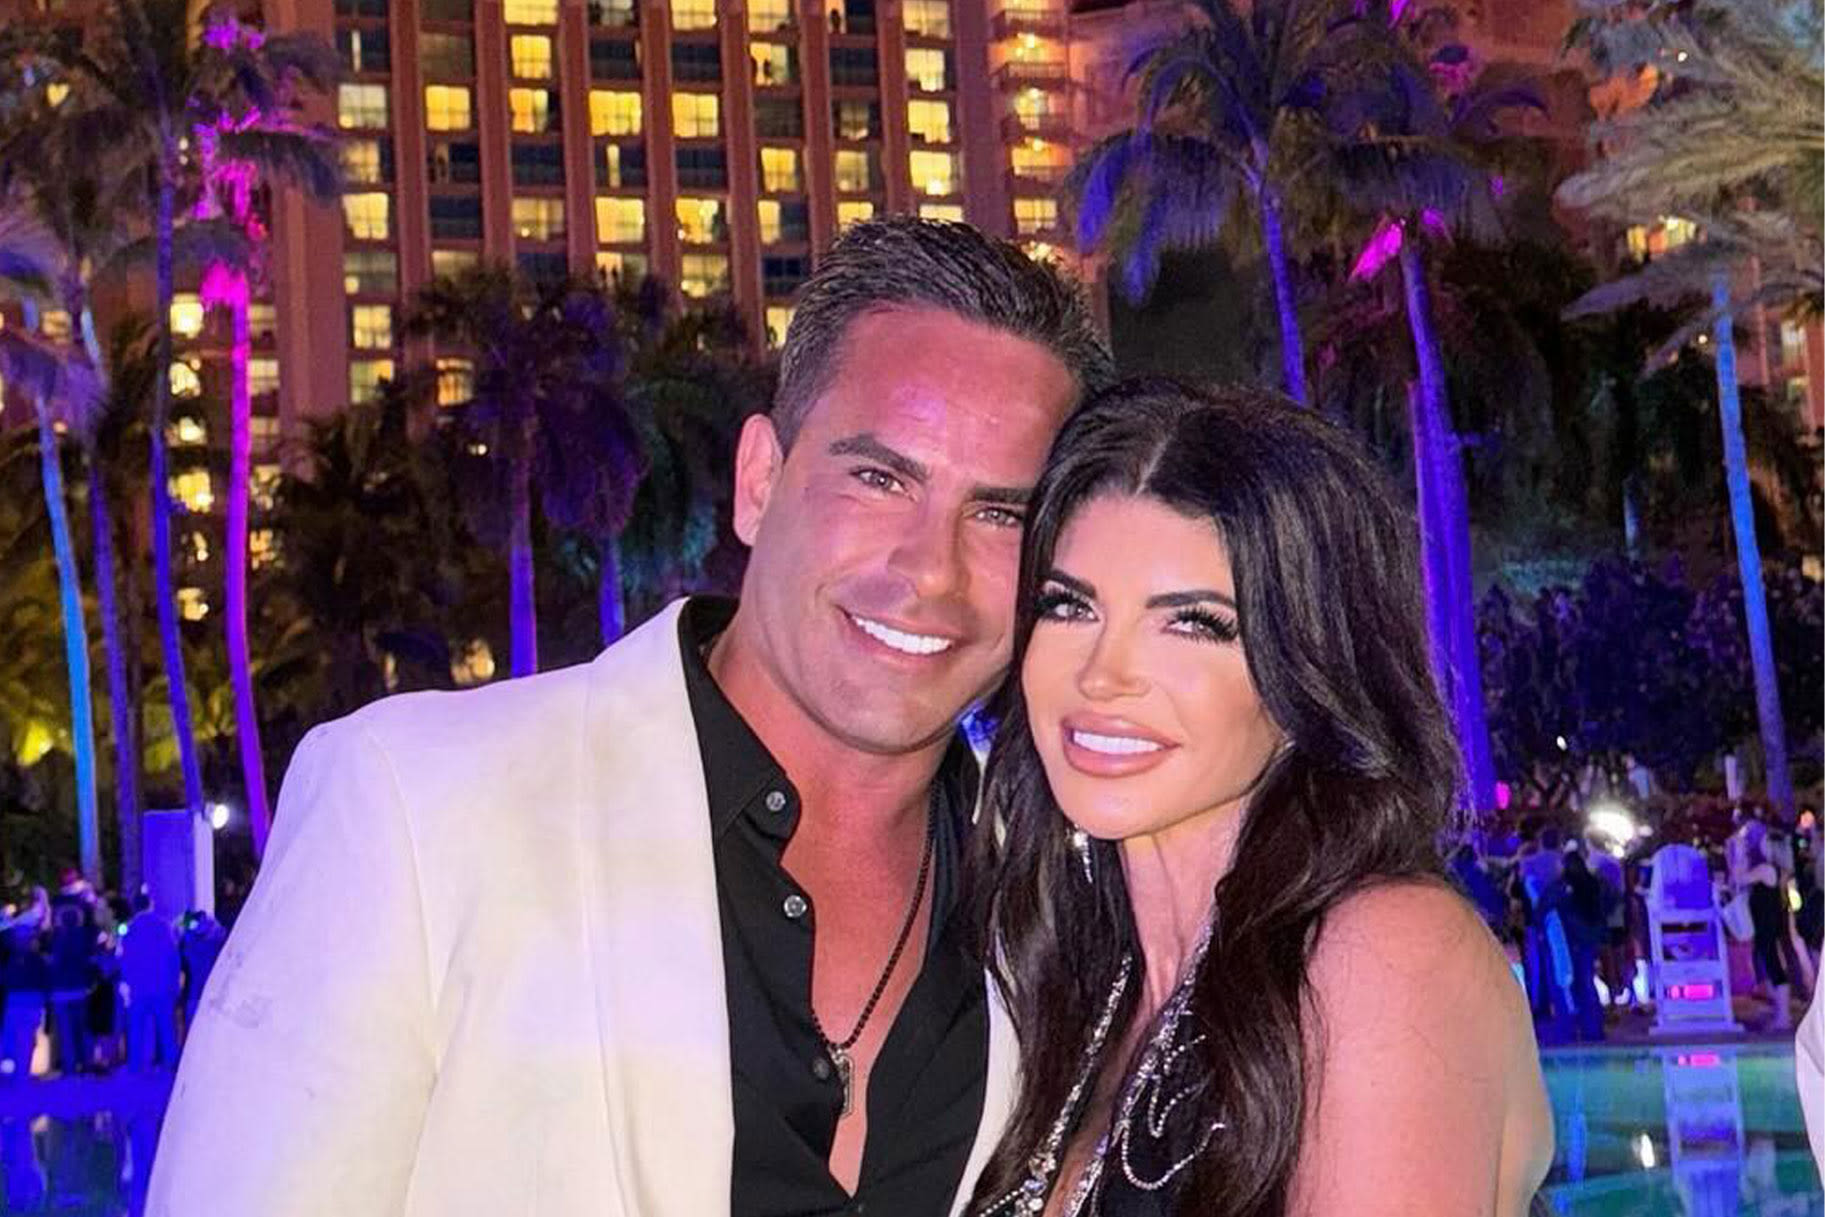 Teresa Giudice Admits She's "Lucky" Louie Ruelas Has Stayed by Her Side: "Poor Guy!" | Bravo TV Official Site